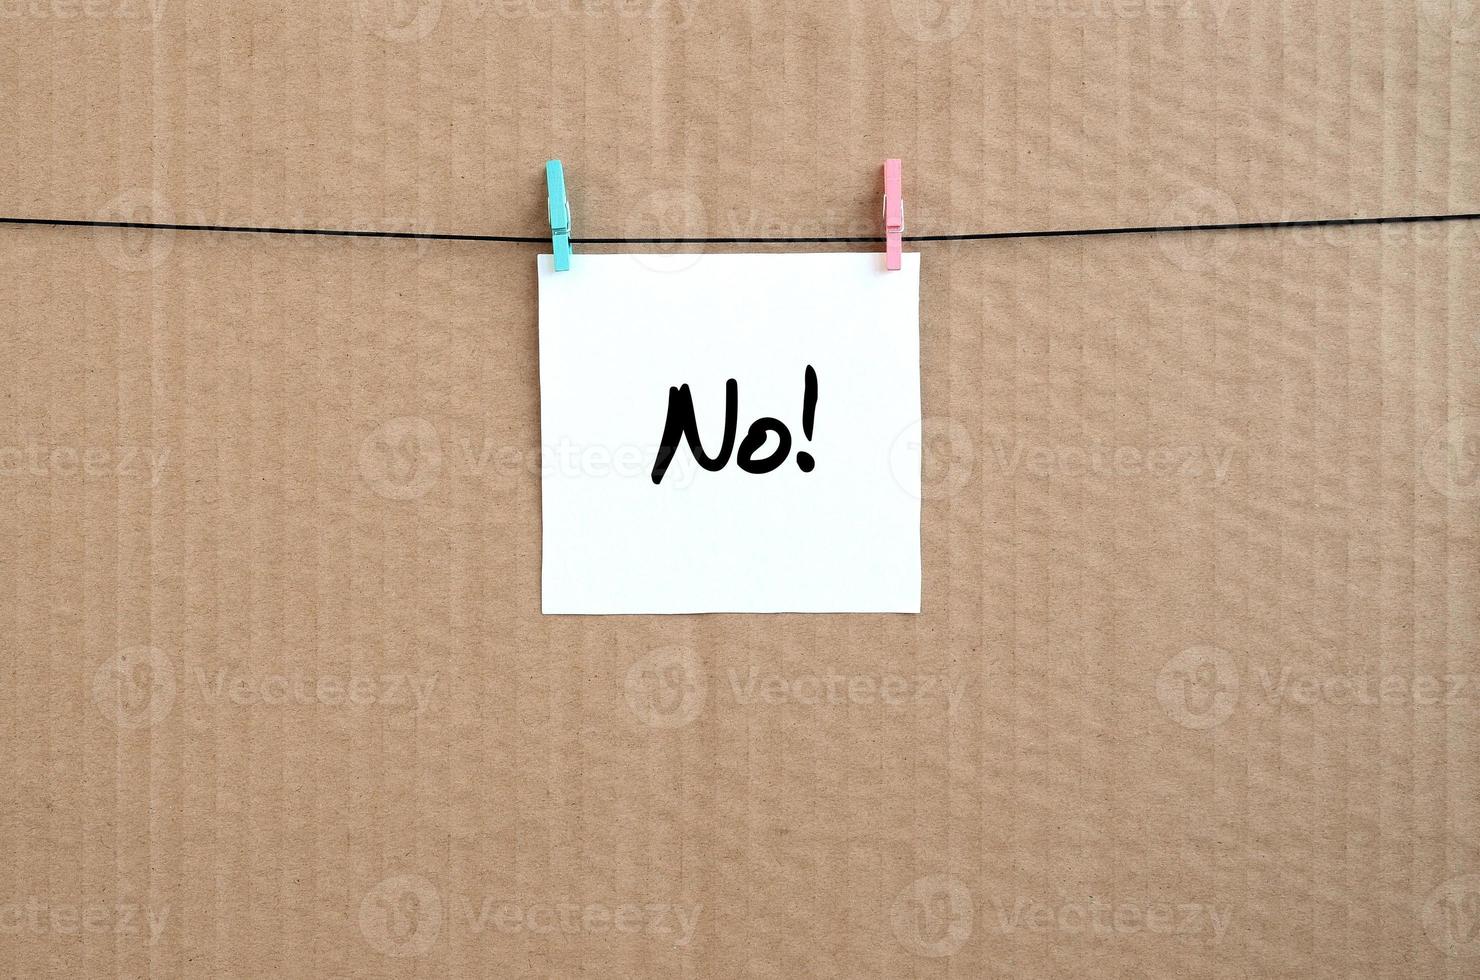 No Note is written on a white sticker that hangs with a clothespin on a rope on a background of brown cardboard photo